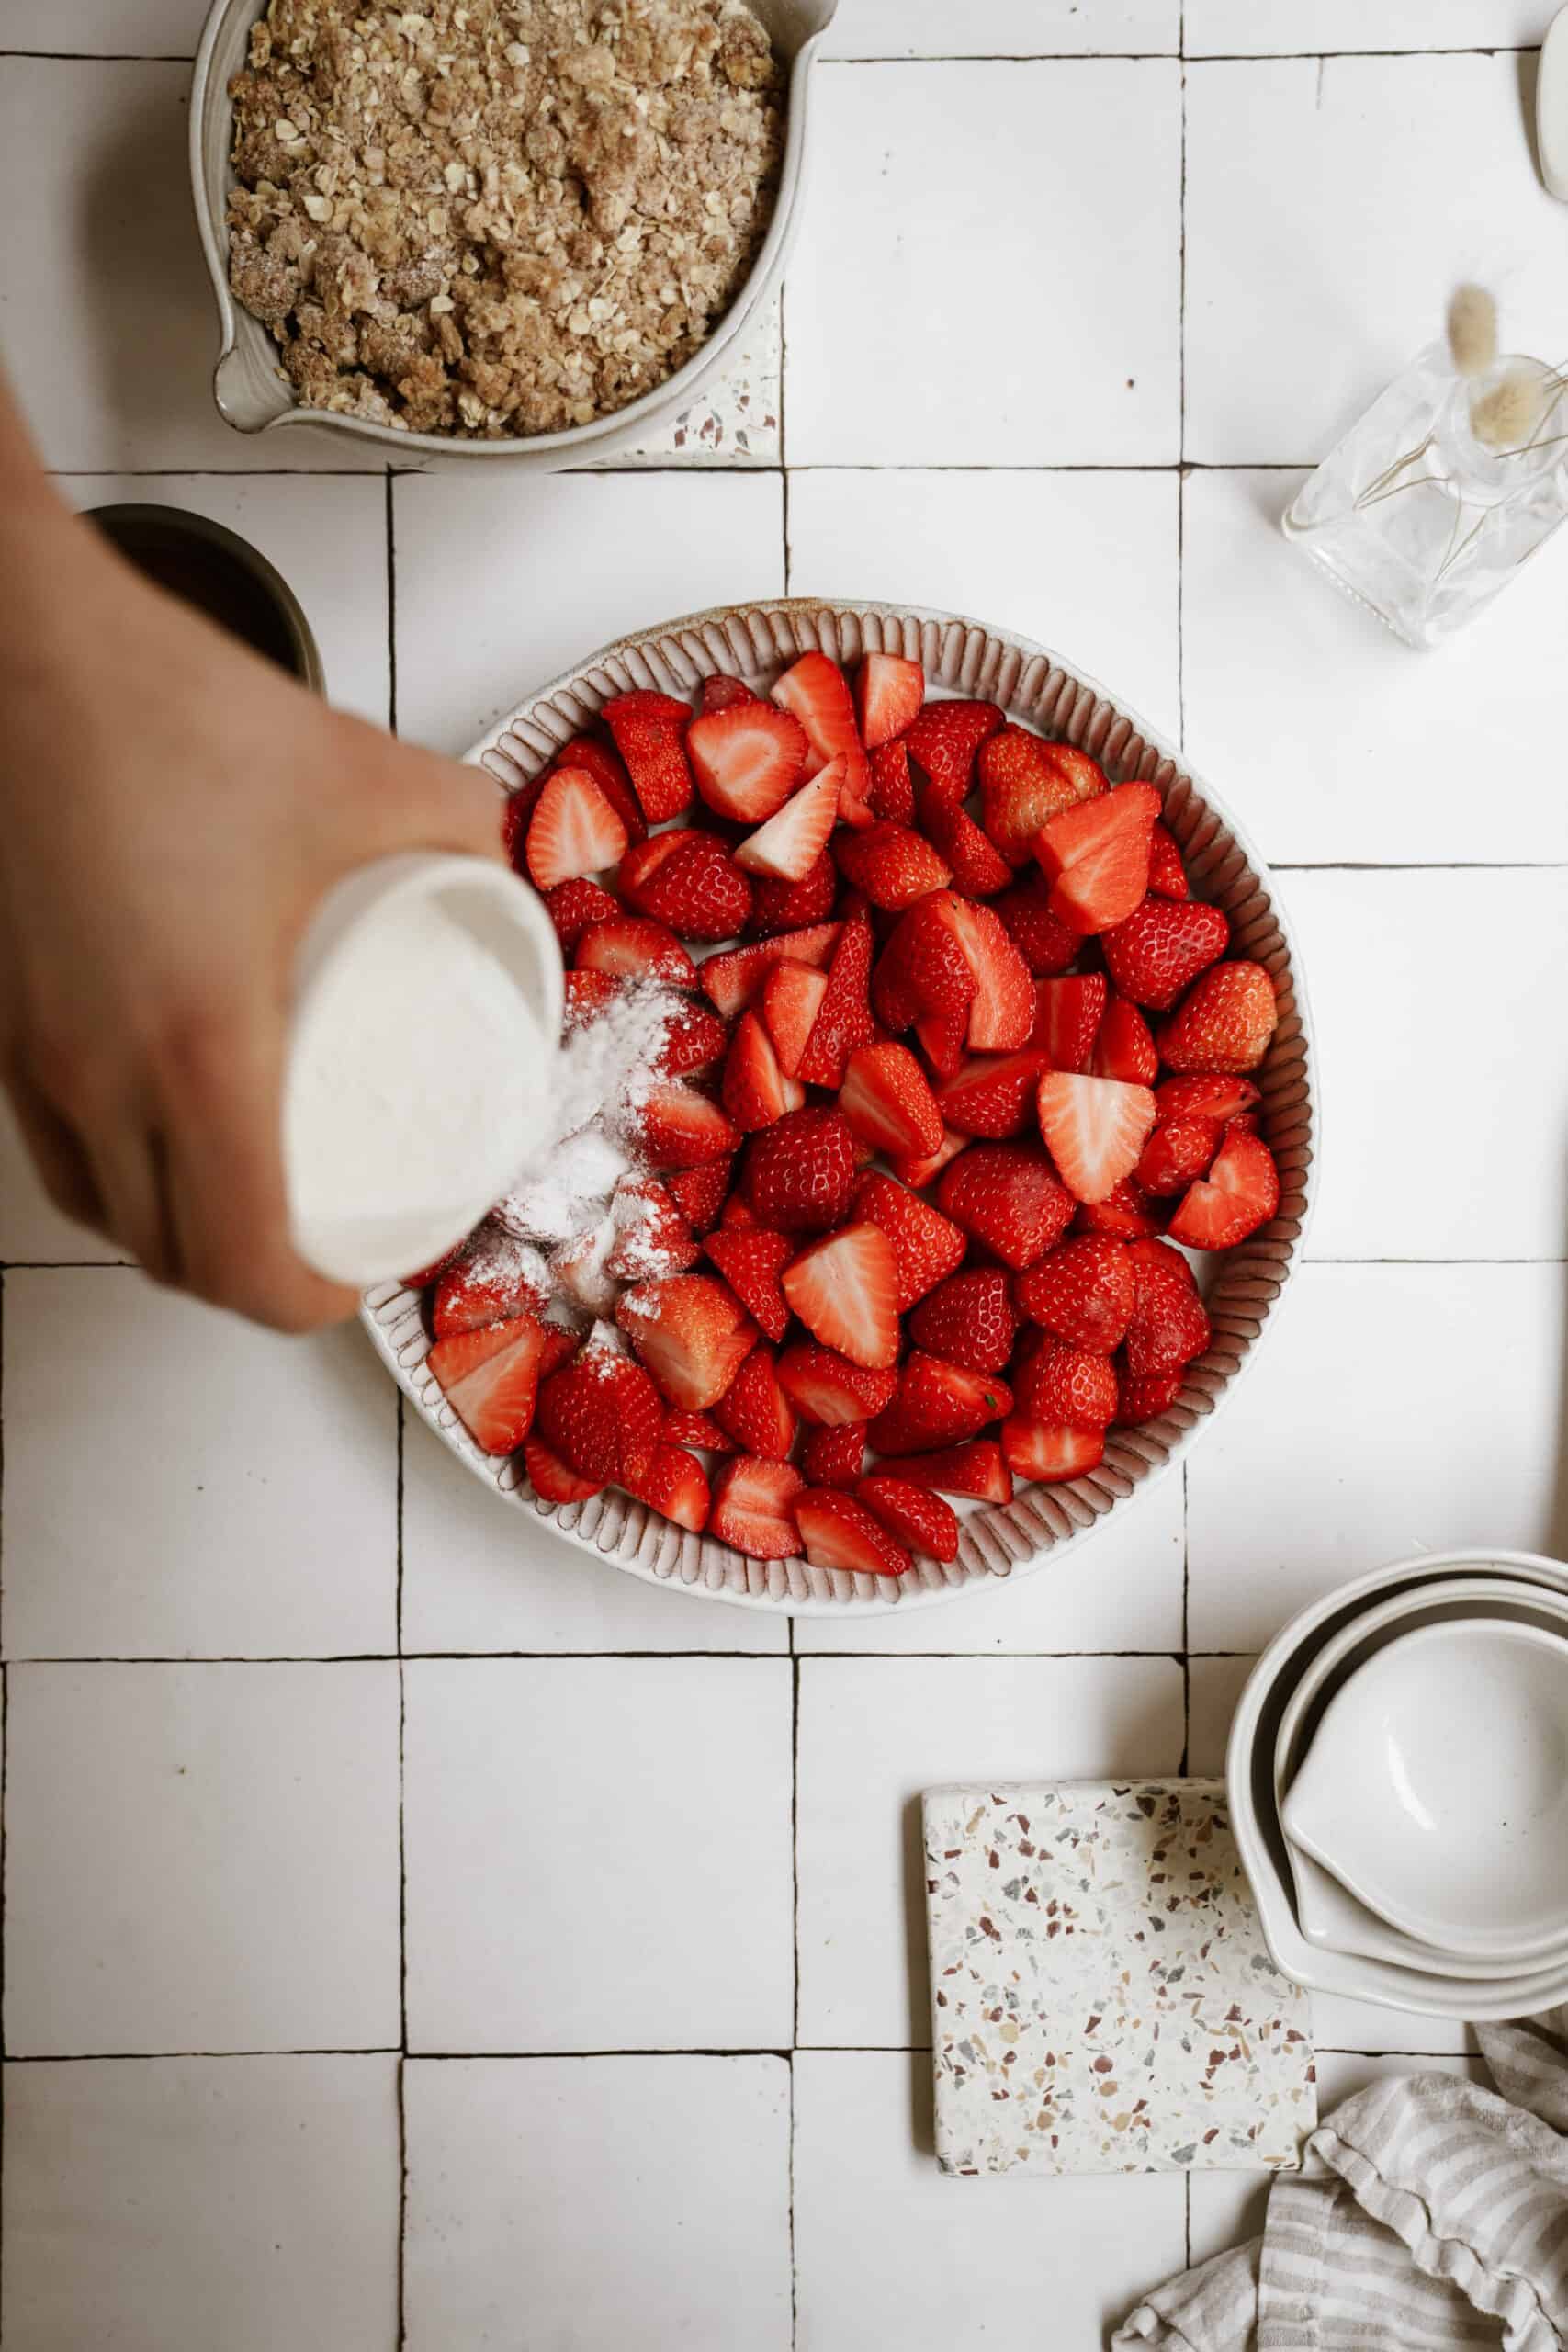 Ingredients being poured on top of strawberries